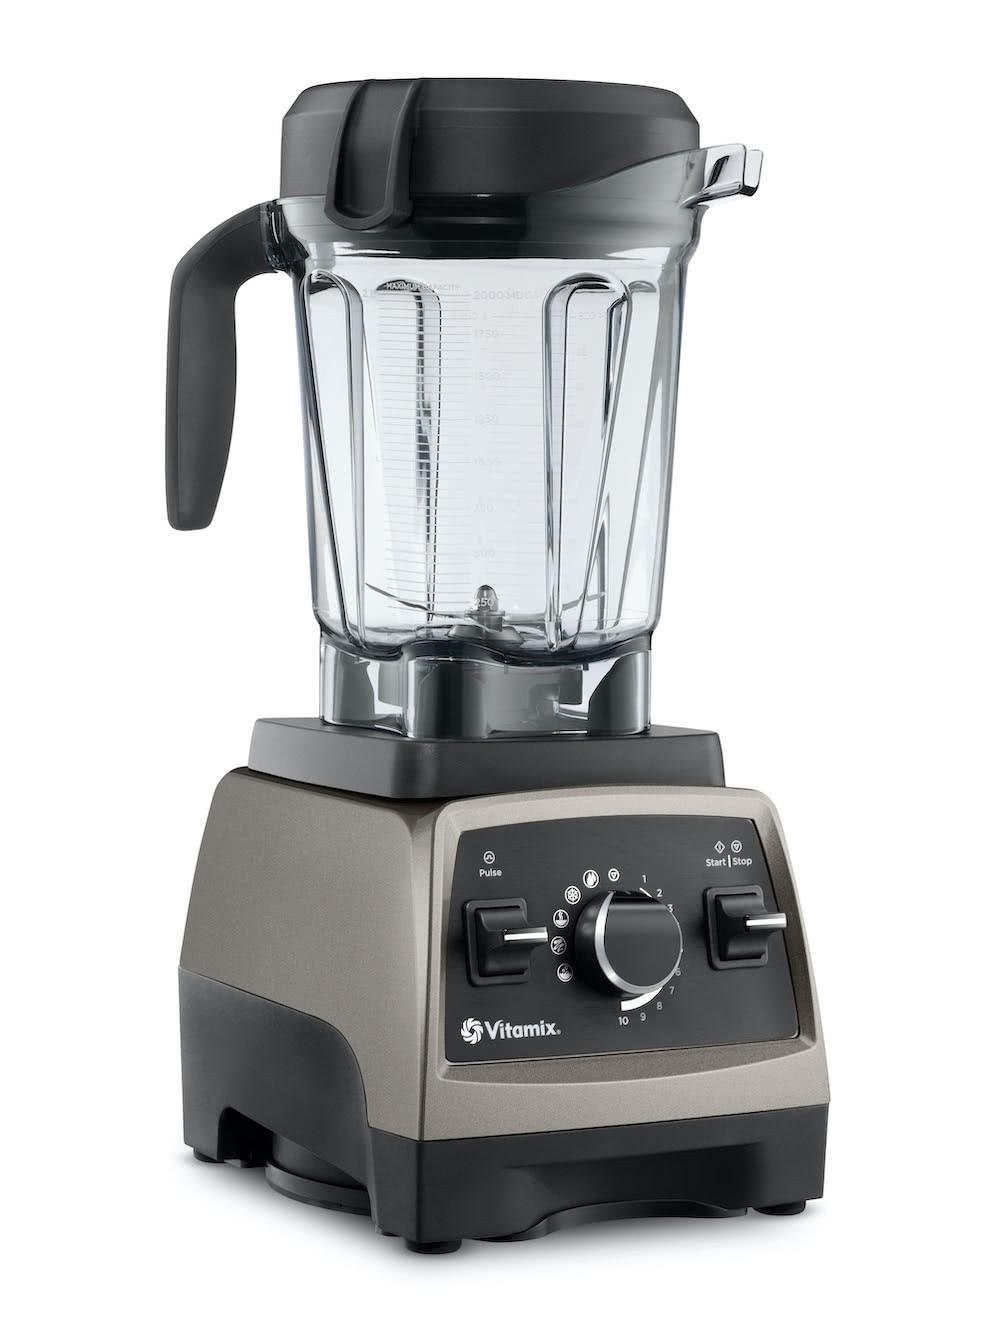 High-Speed Blender - Do You Need One?